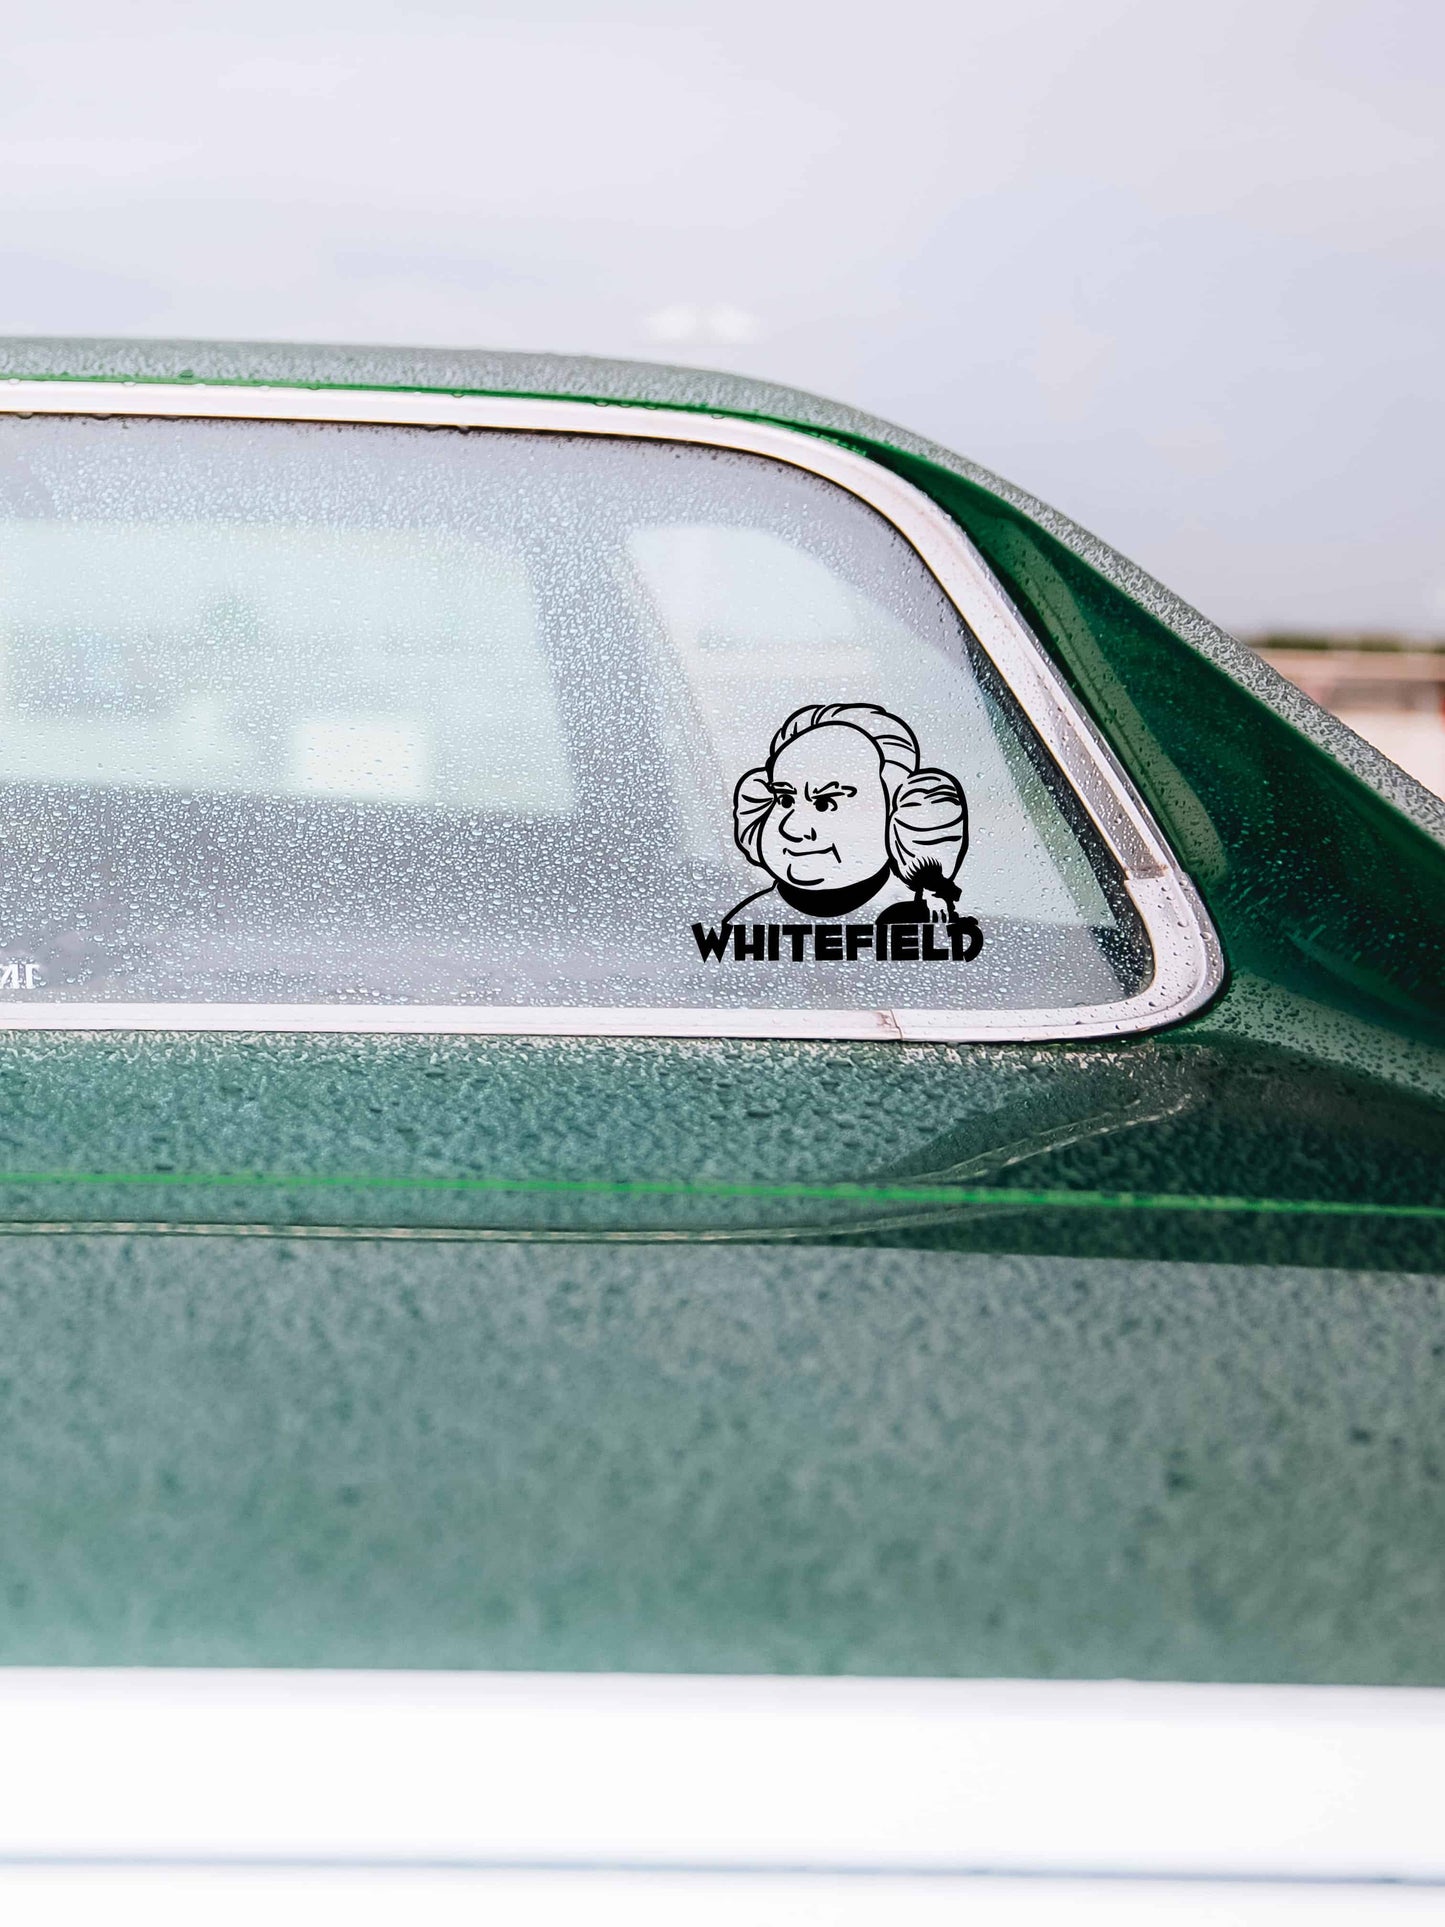 George Whitefield - Decal